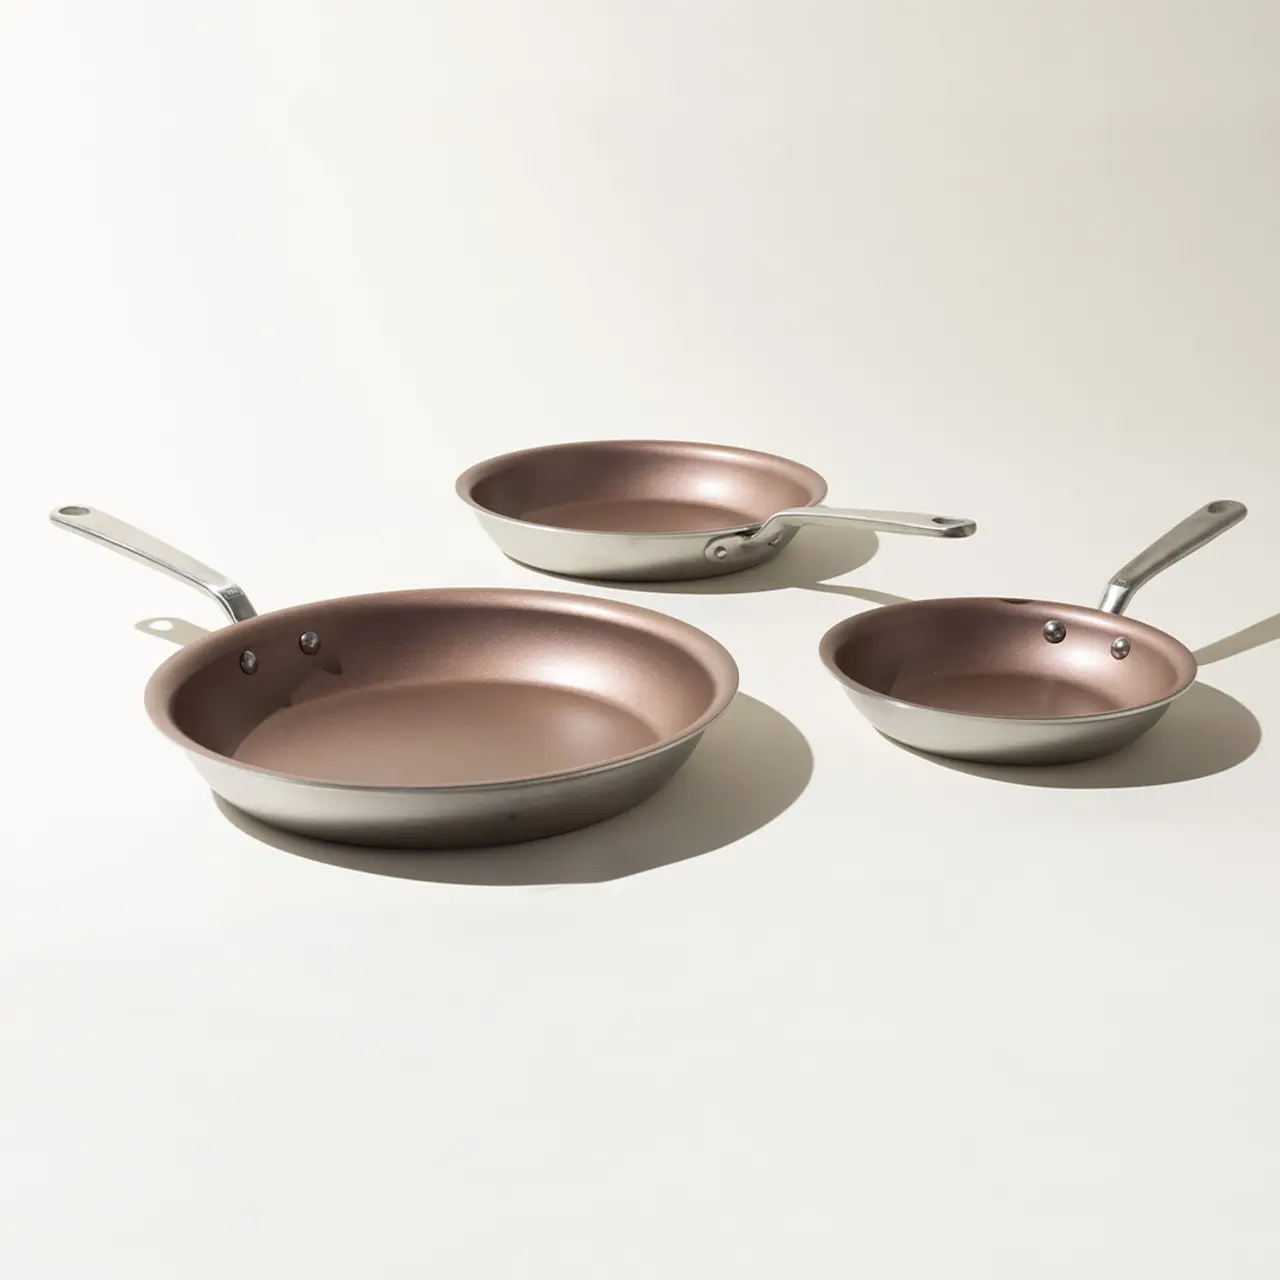 Three different-sized copper-colored frying pans with silver handles are arranged on a light background.